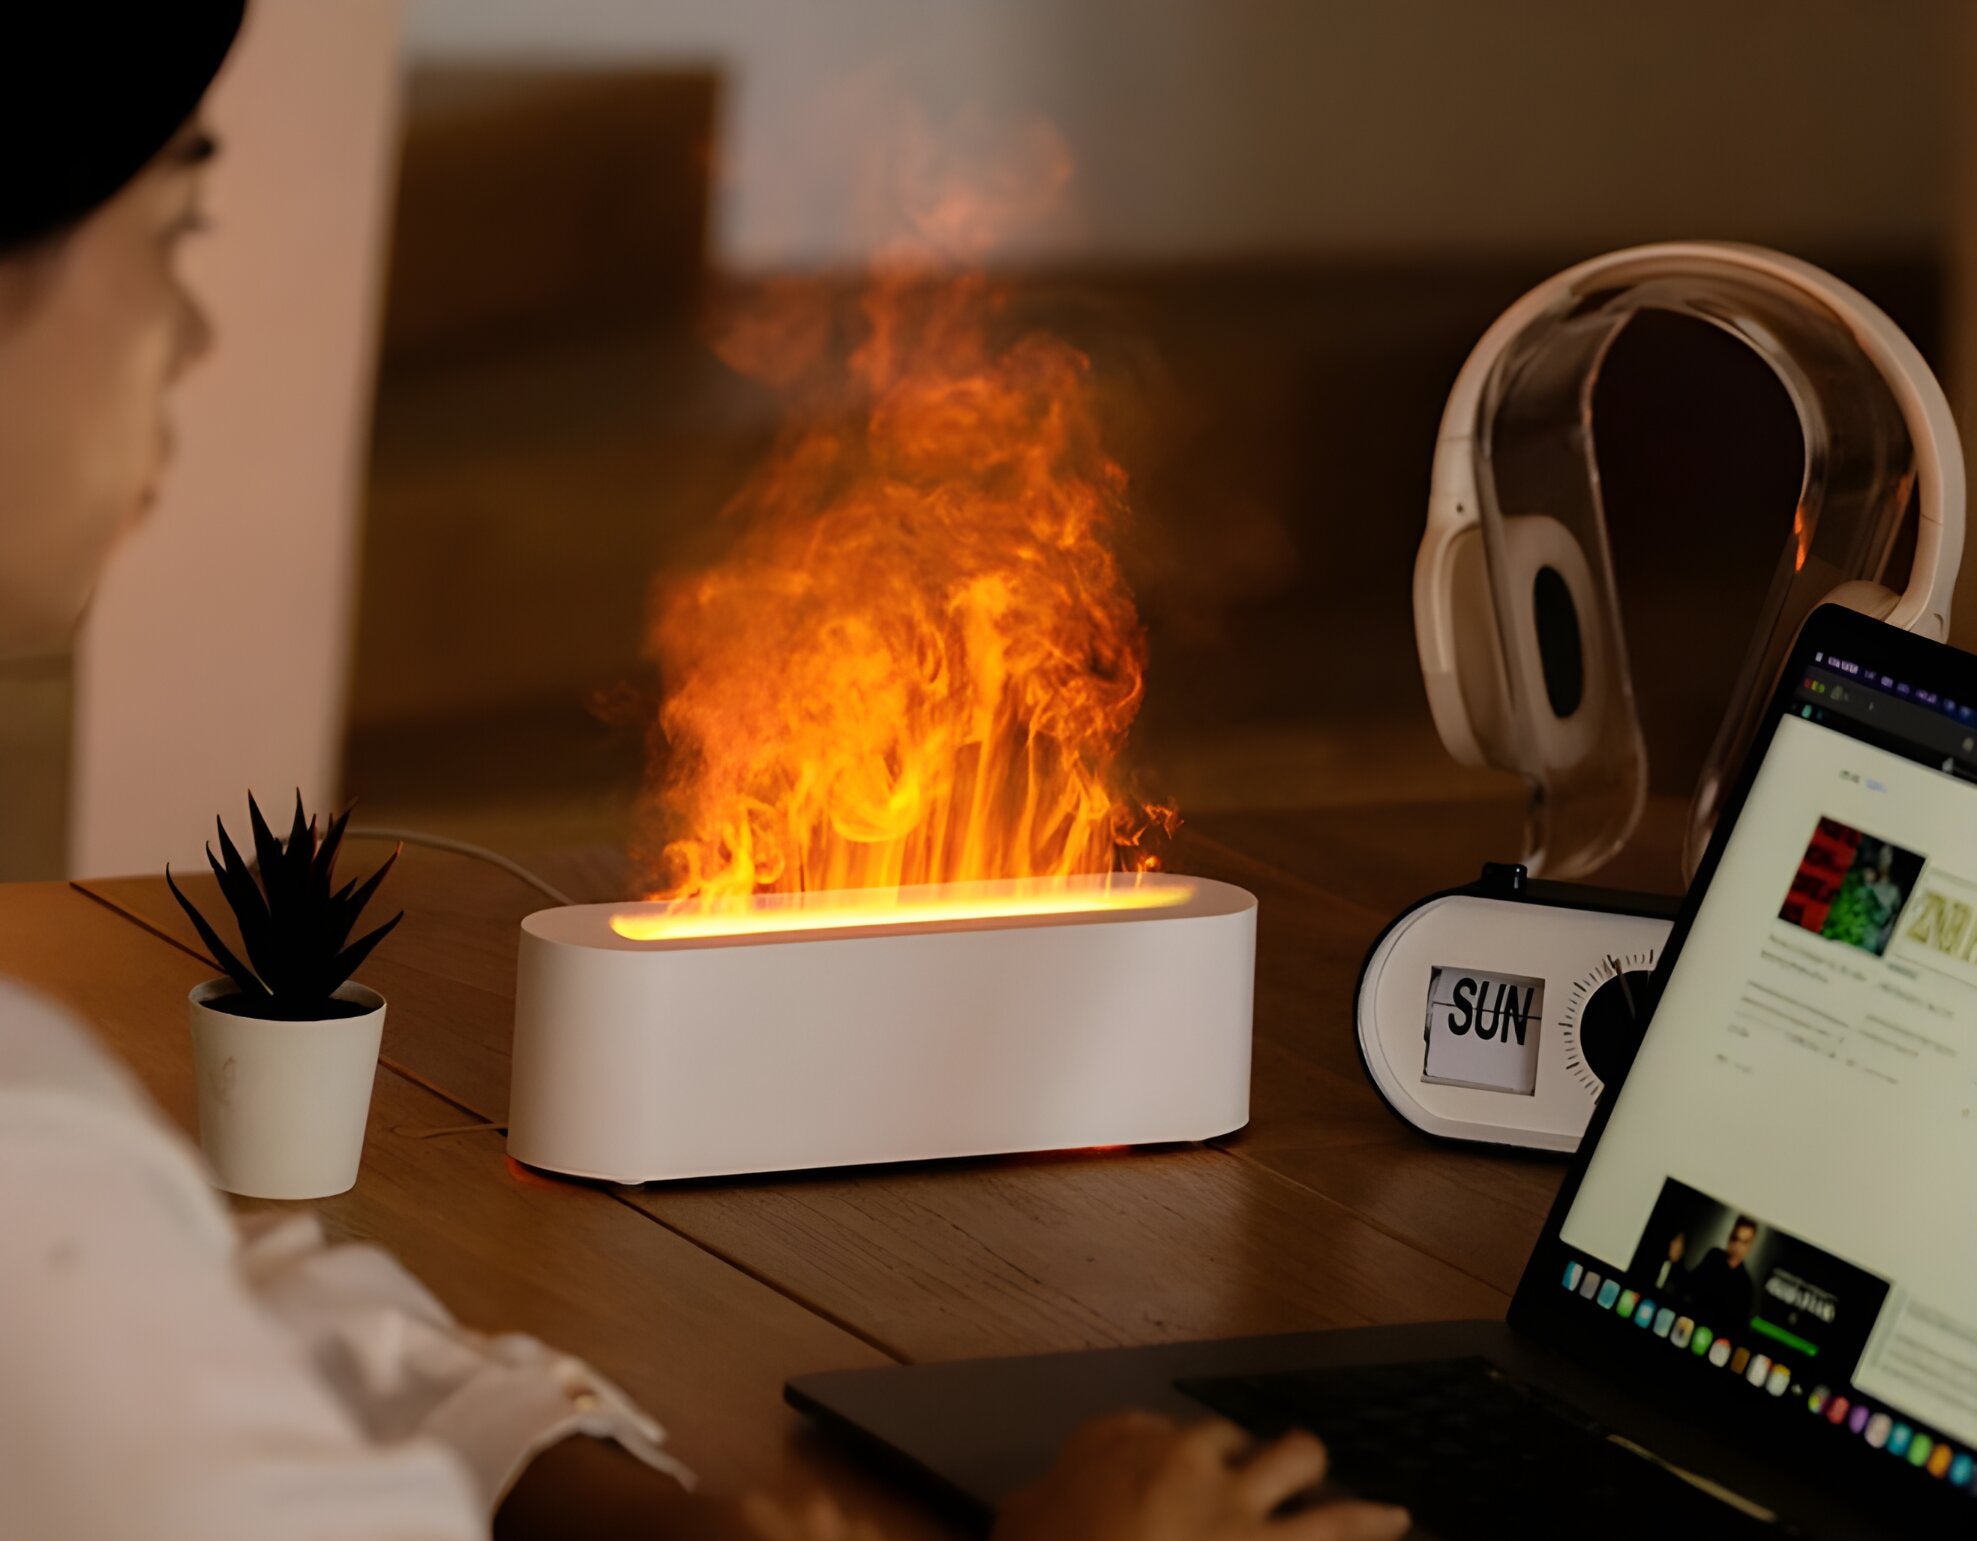 Flame simulation aroma diffuser for your everyday work to keep you chilled.